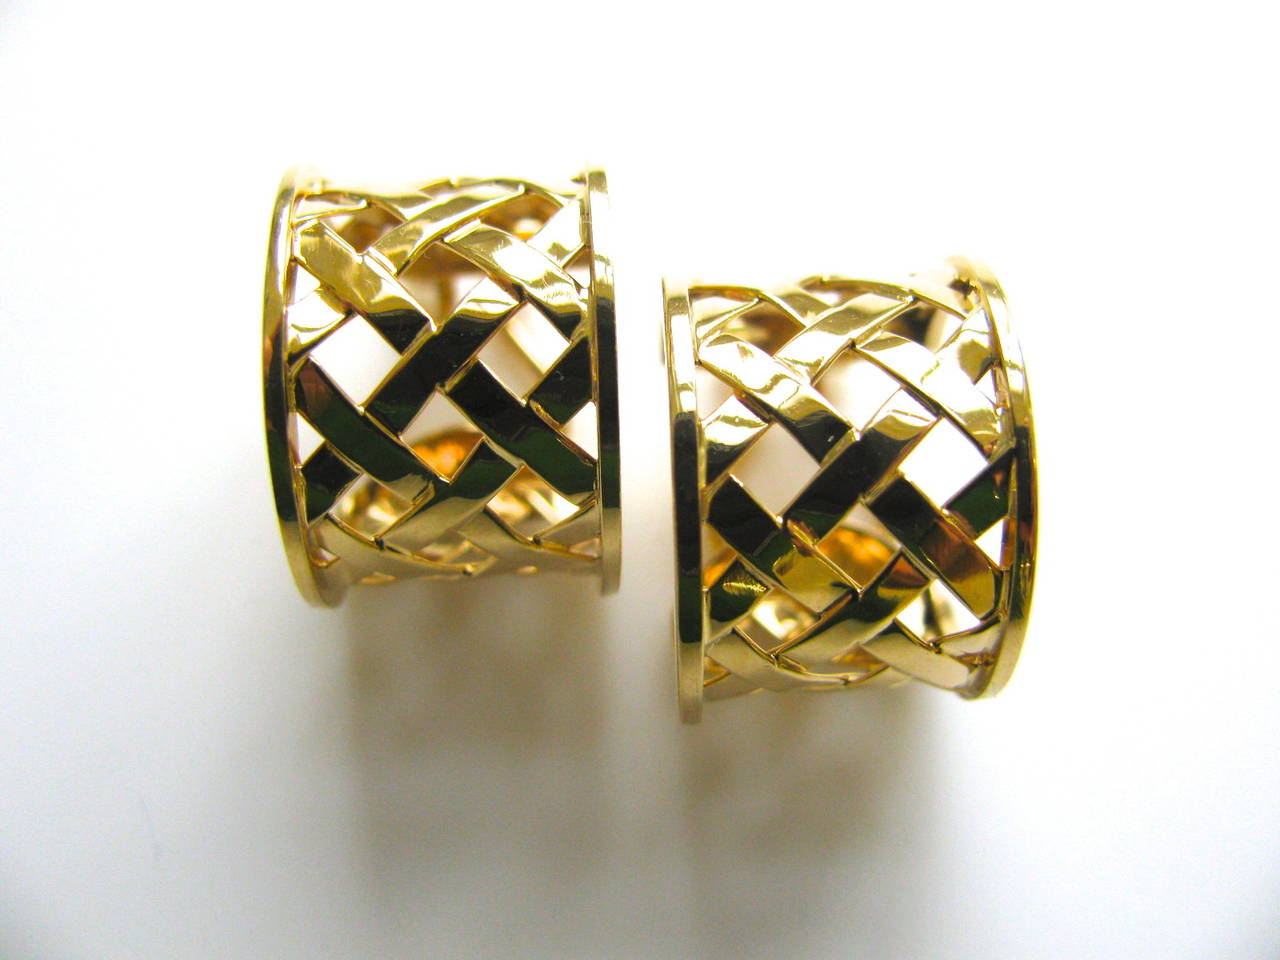 A smart pair of yellow gold earrings by Fulco di Verdura. The 5/8